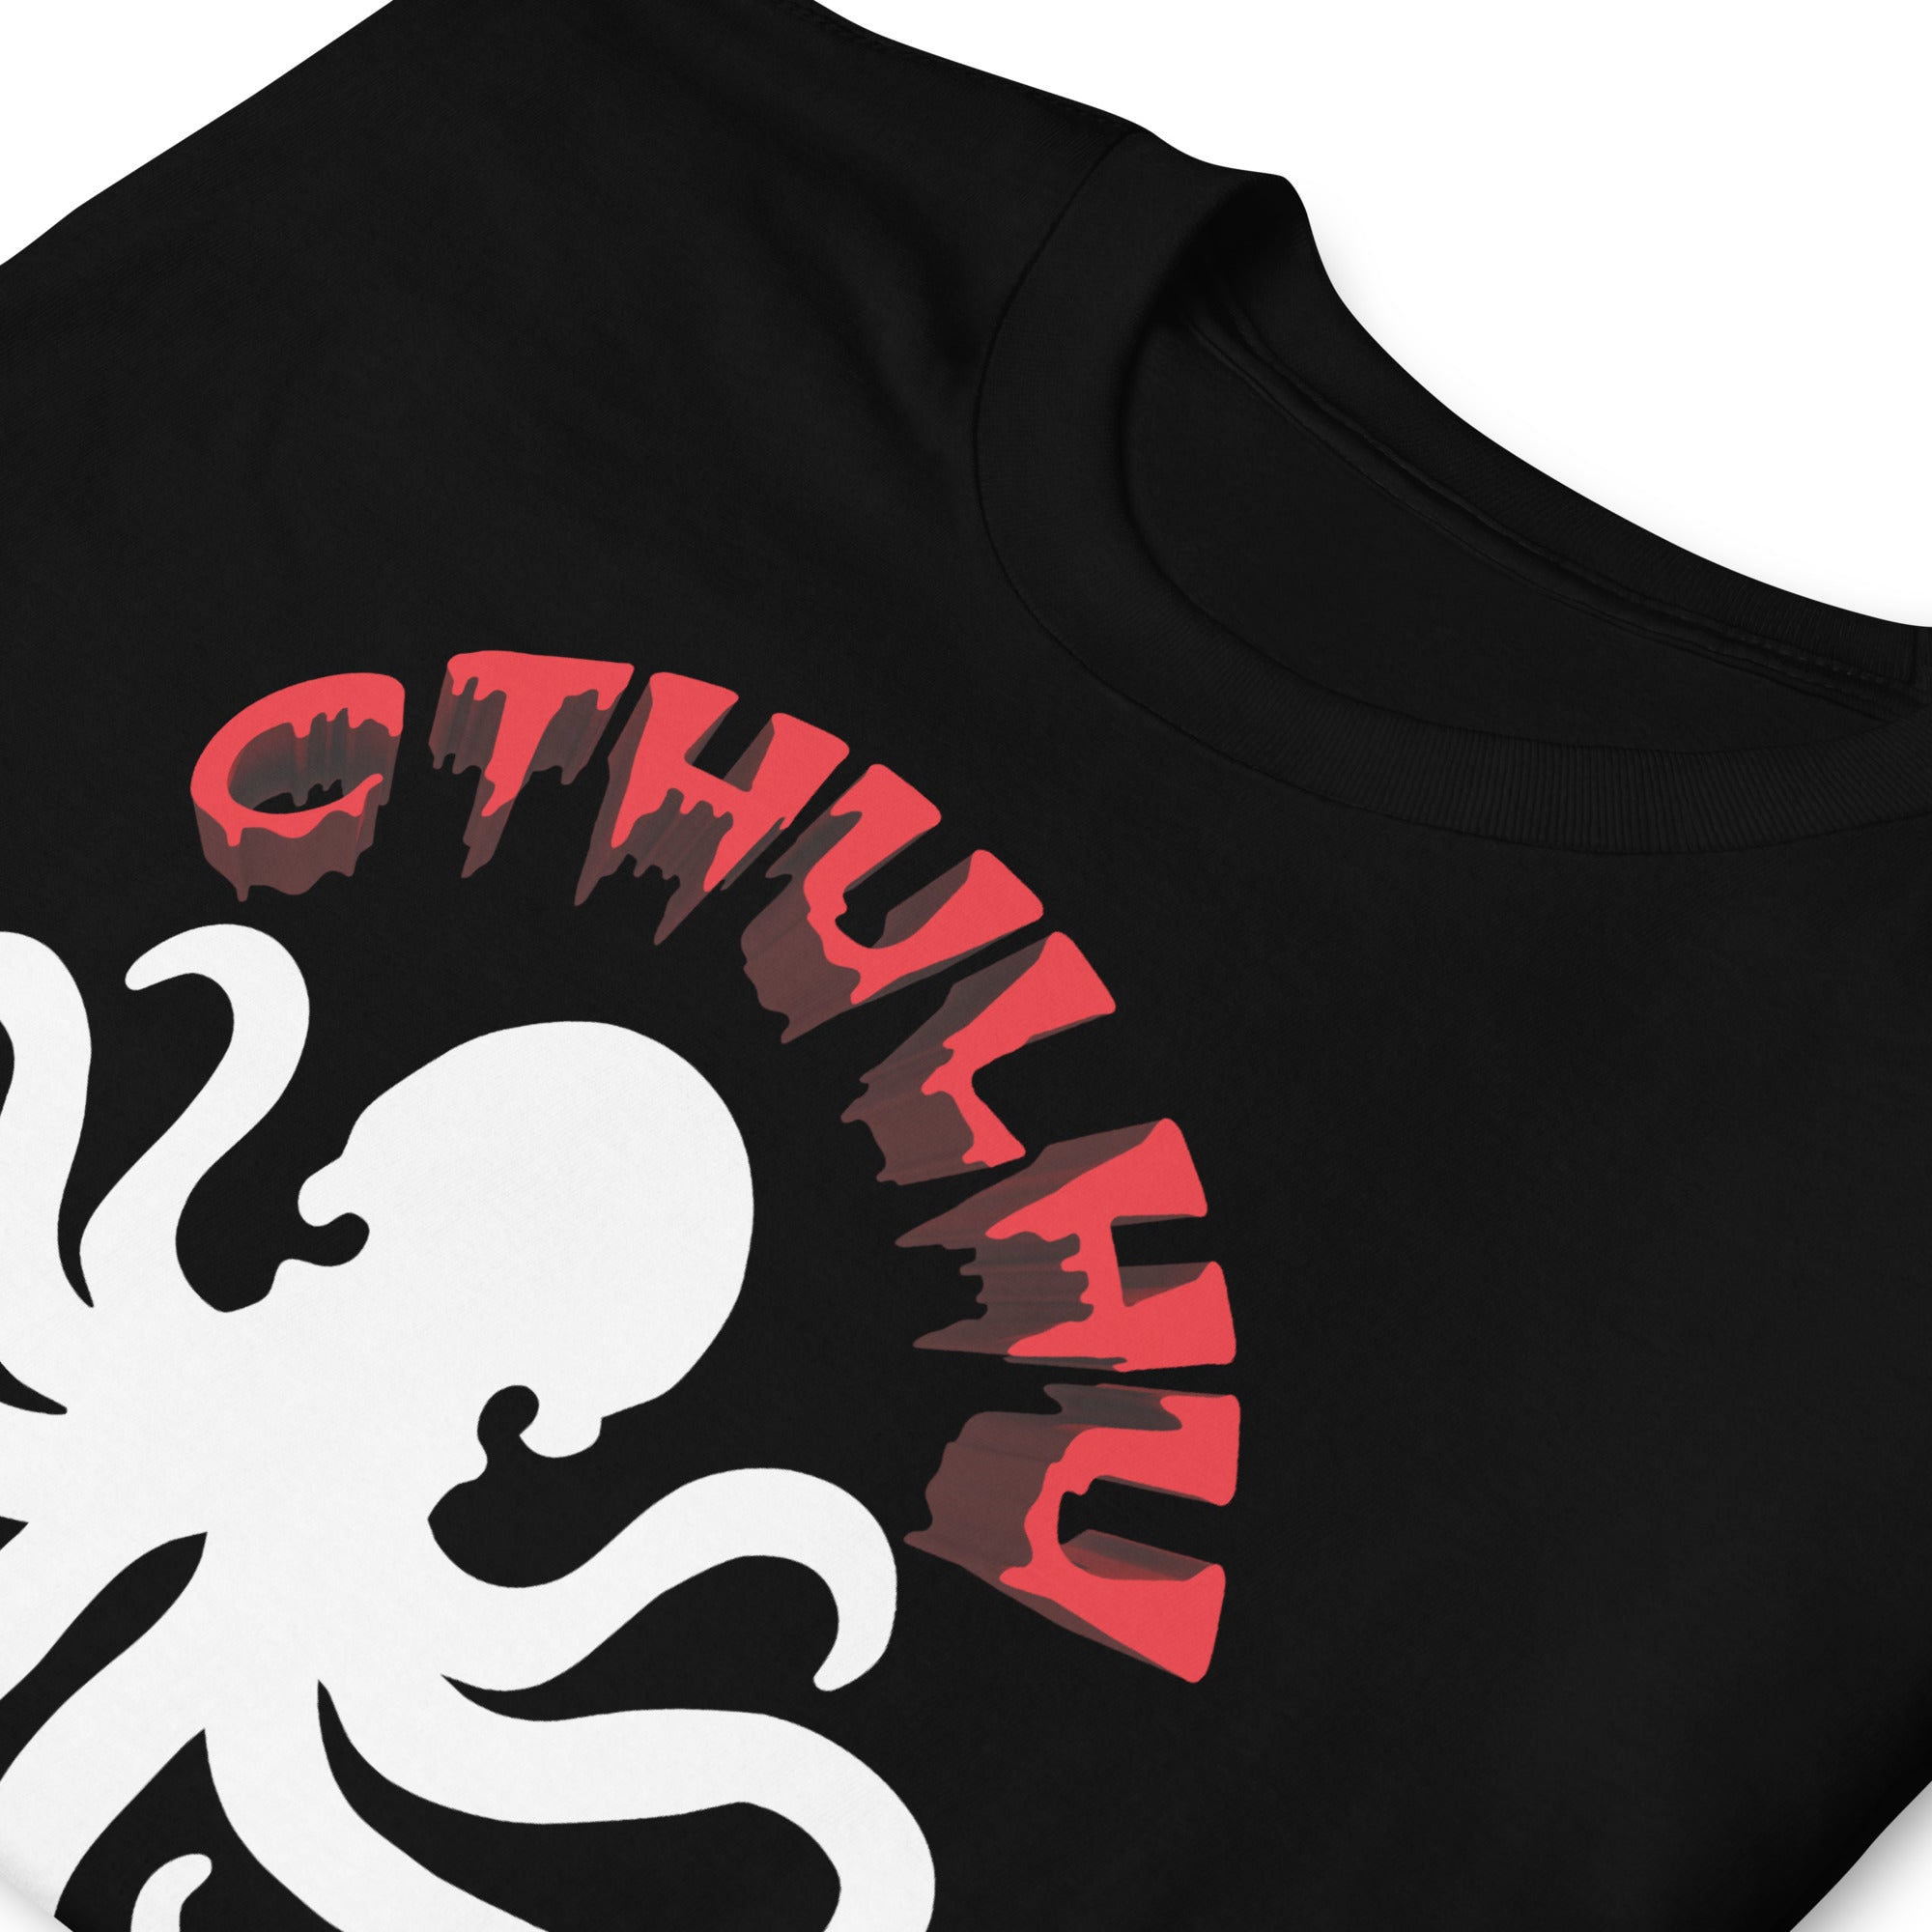 Cthulhu The Great Old One Lovecraft Horror Men's Short-Sleeve T-Shirt - Edge of Life Designs